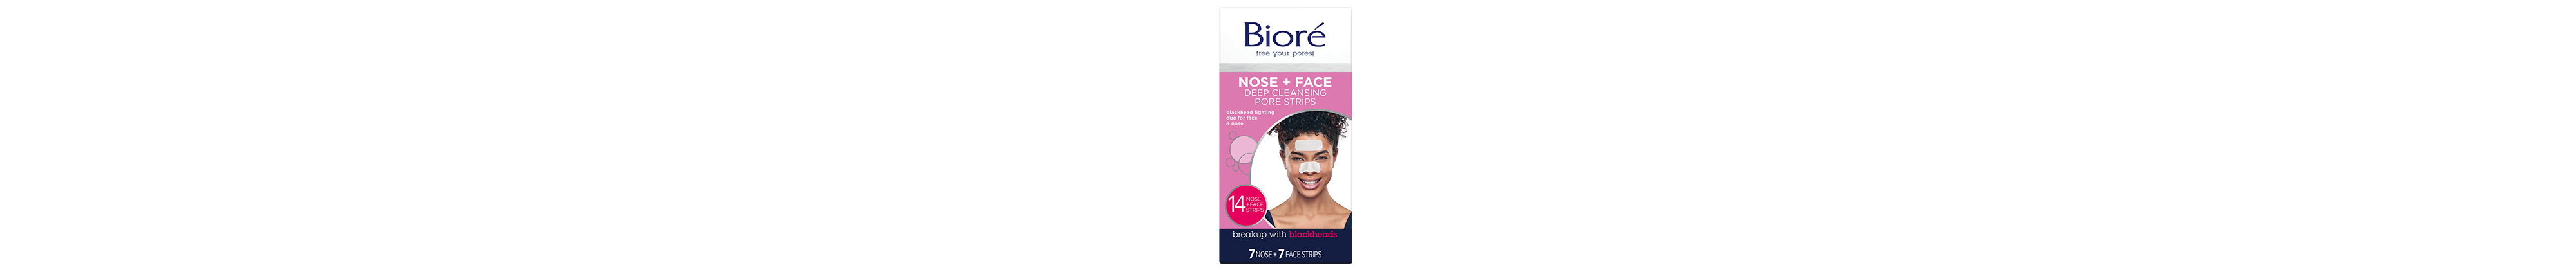 Biore Nose+Face, Deep Cleansing Pore Strips